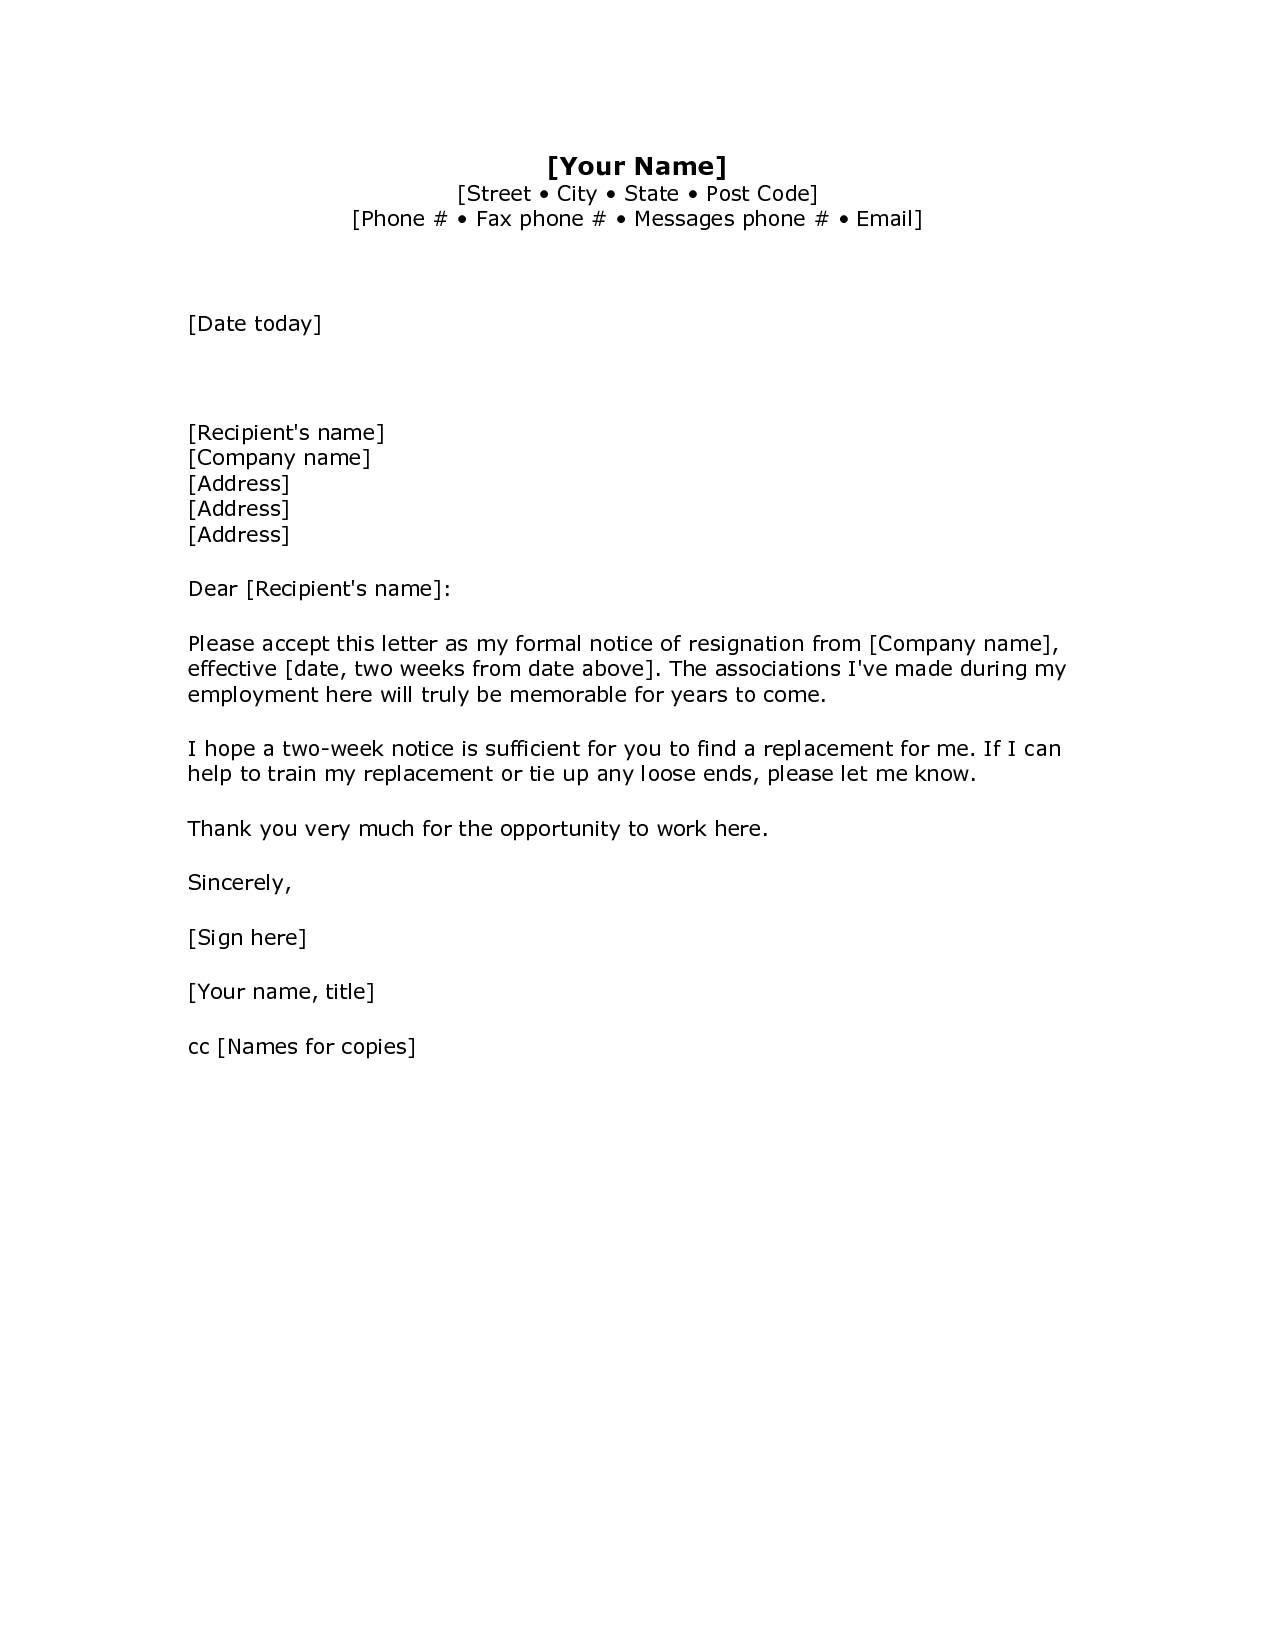 Online Letter Template - 2 Weeks Notice Letter Resignation Letter Week Notice Words Hdwriting